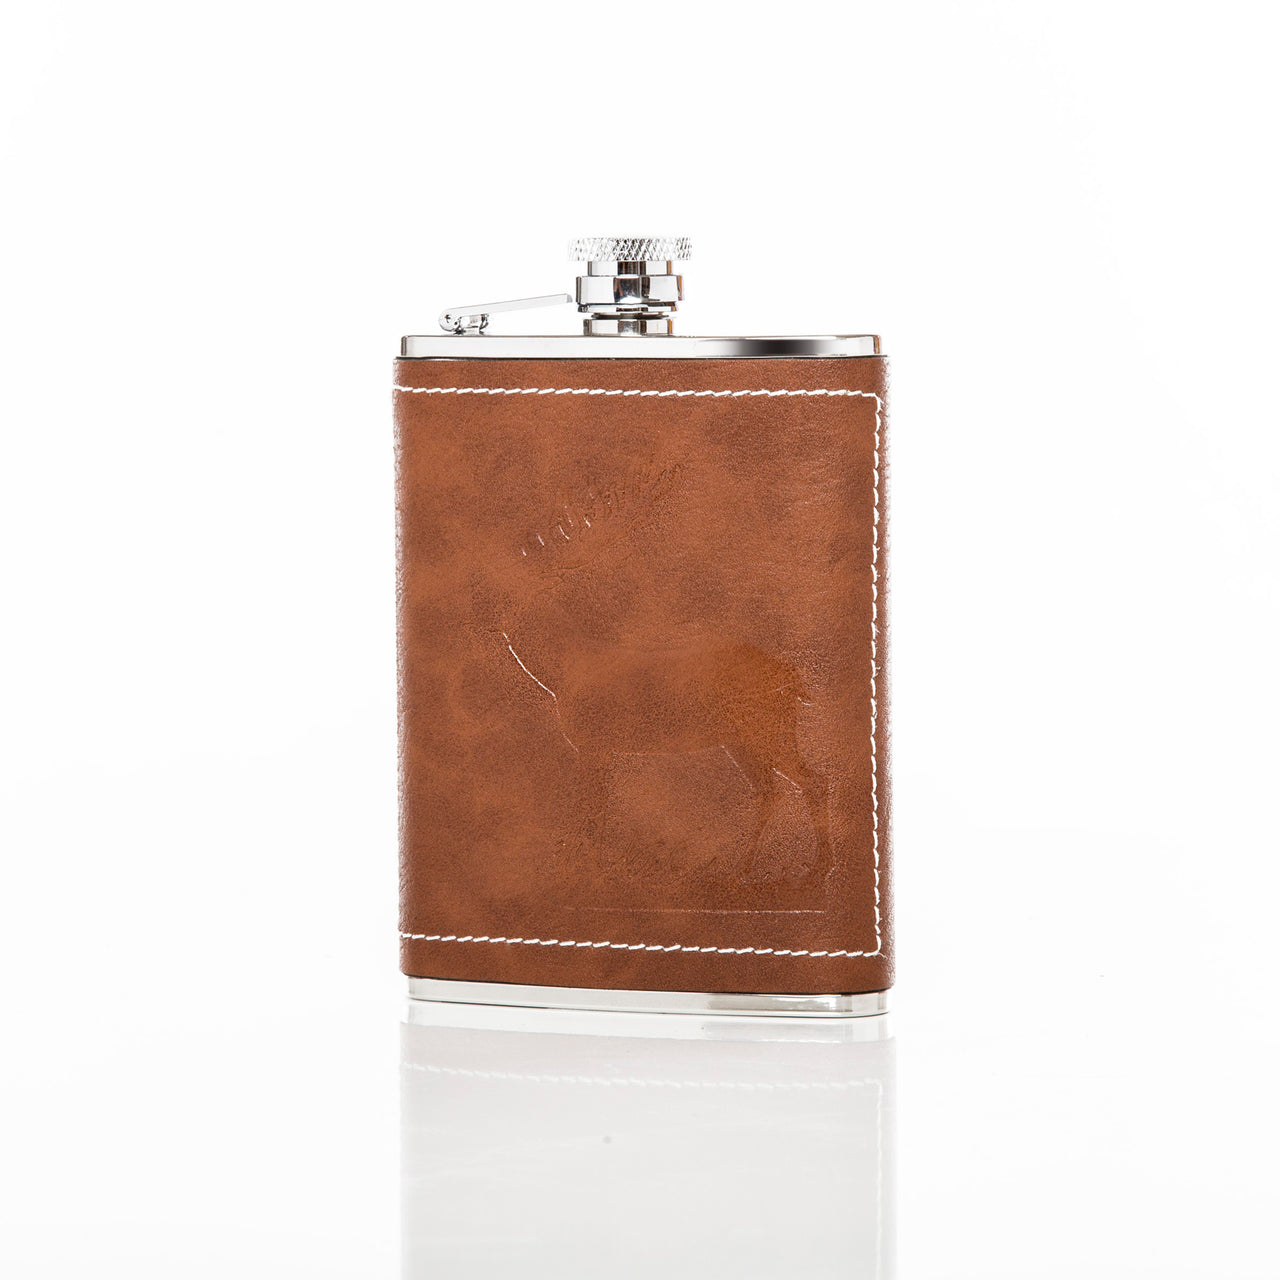 The Oh "Deer" Flask